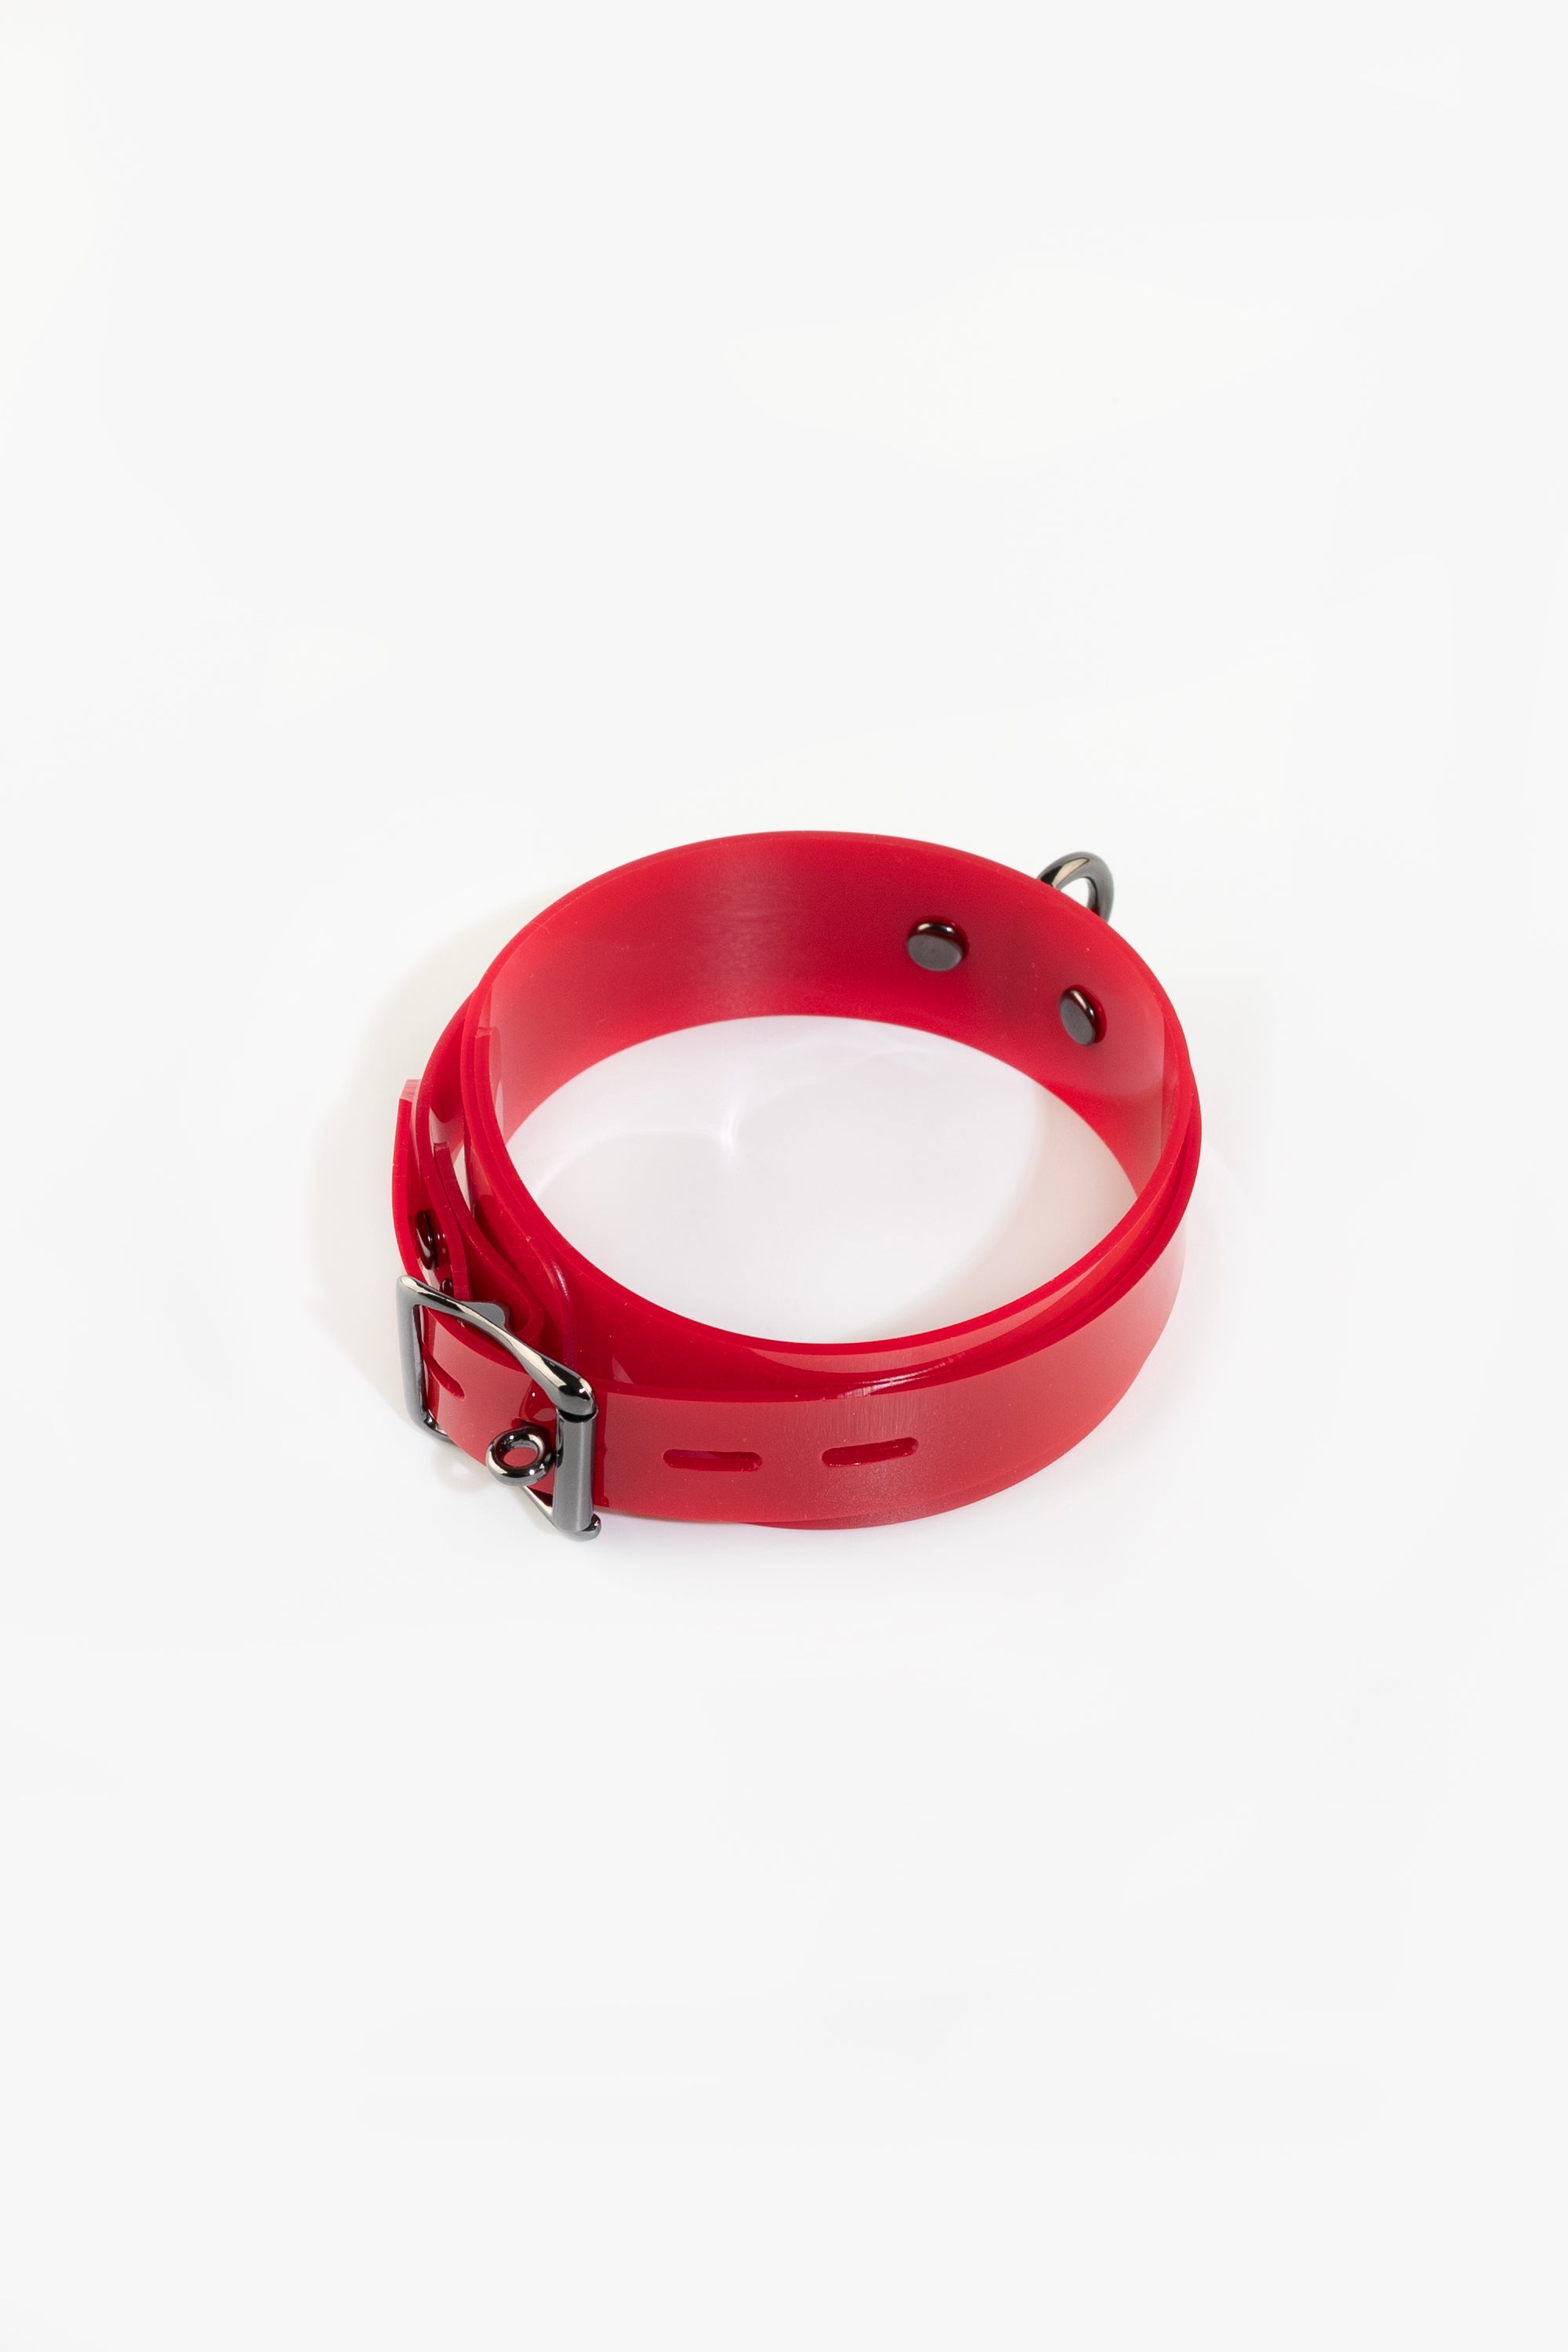 Lockable choker with D-ring, red/black